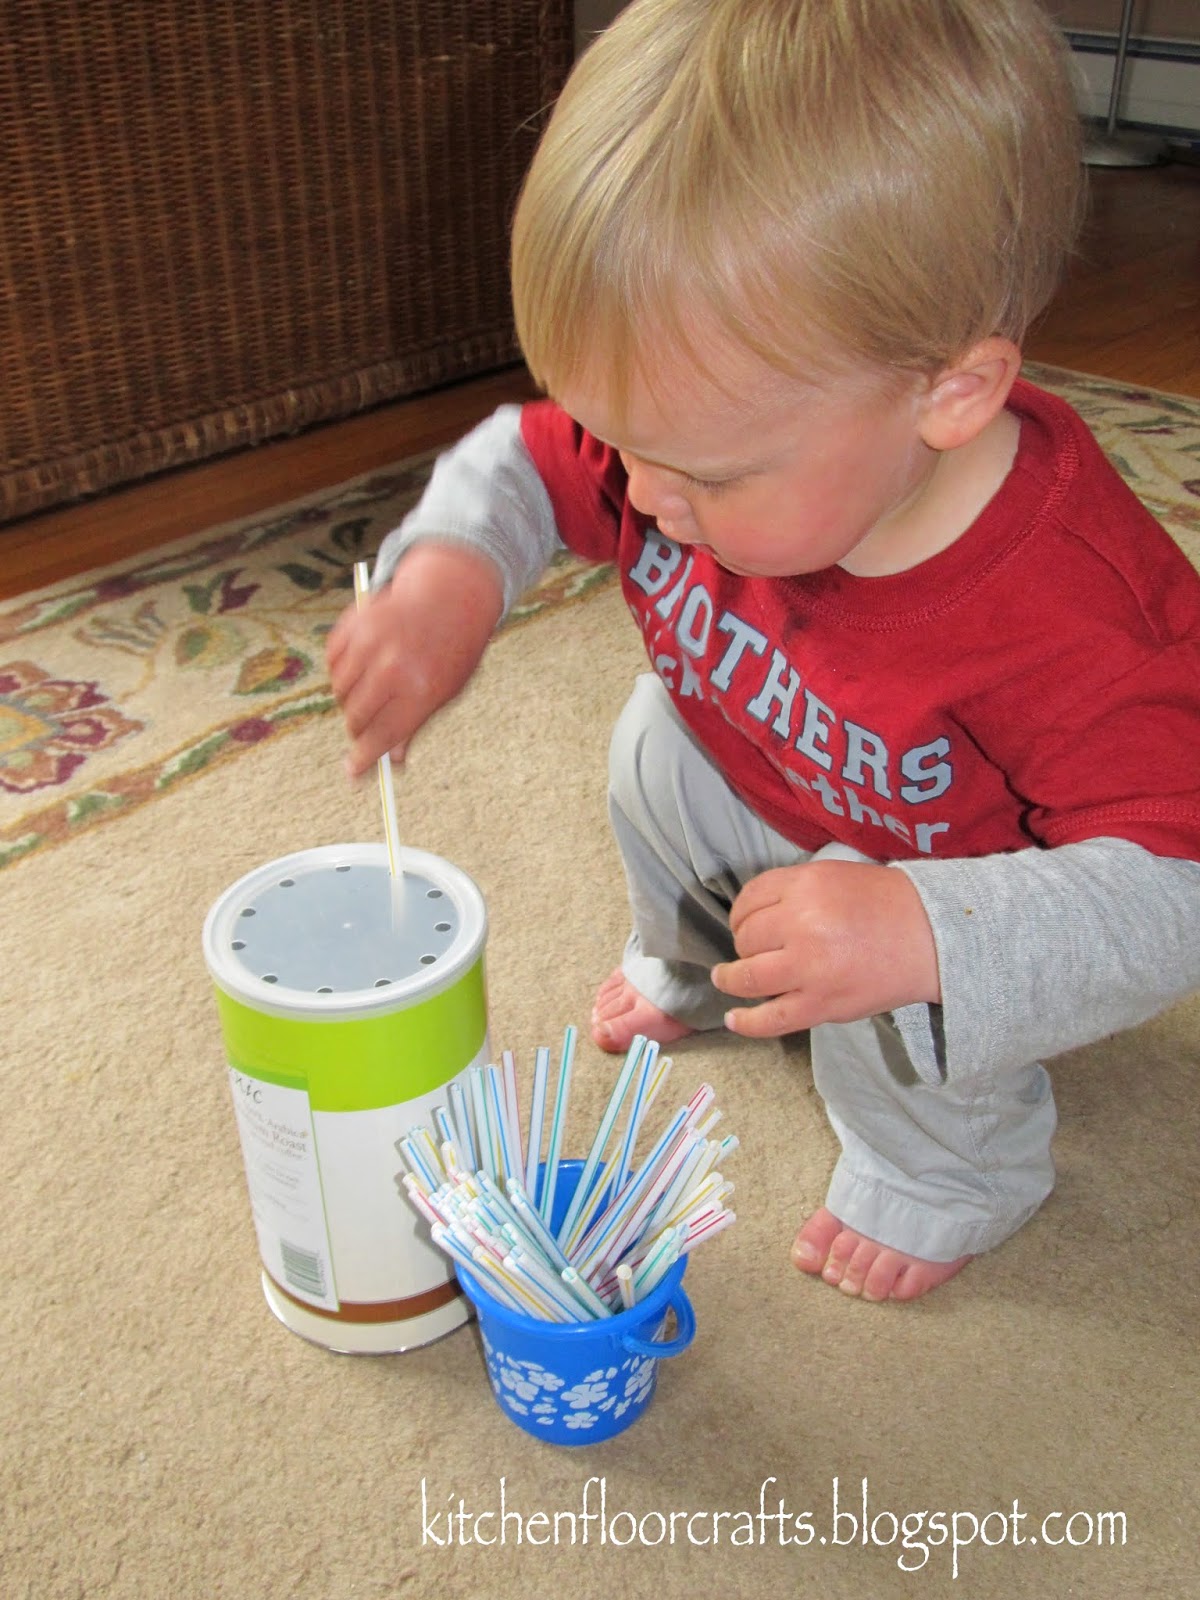 Kitchen Floor Crafts: Simple Straw Drop for Toddlers